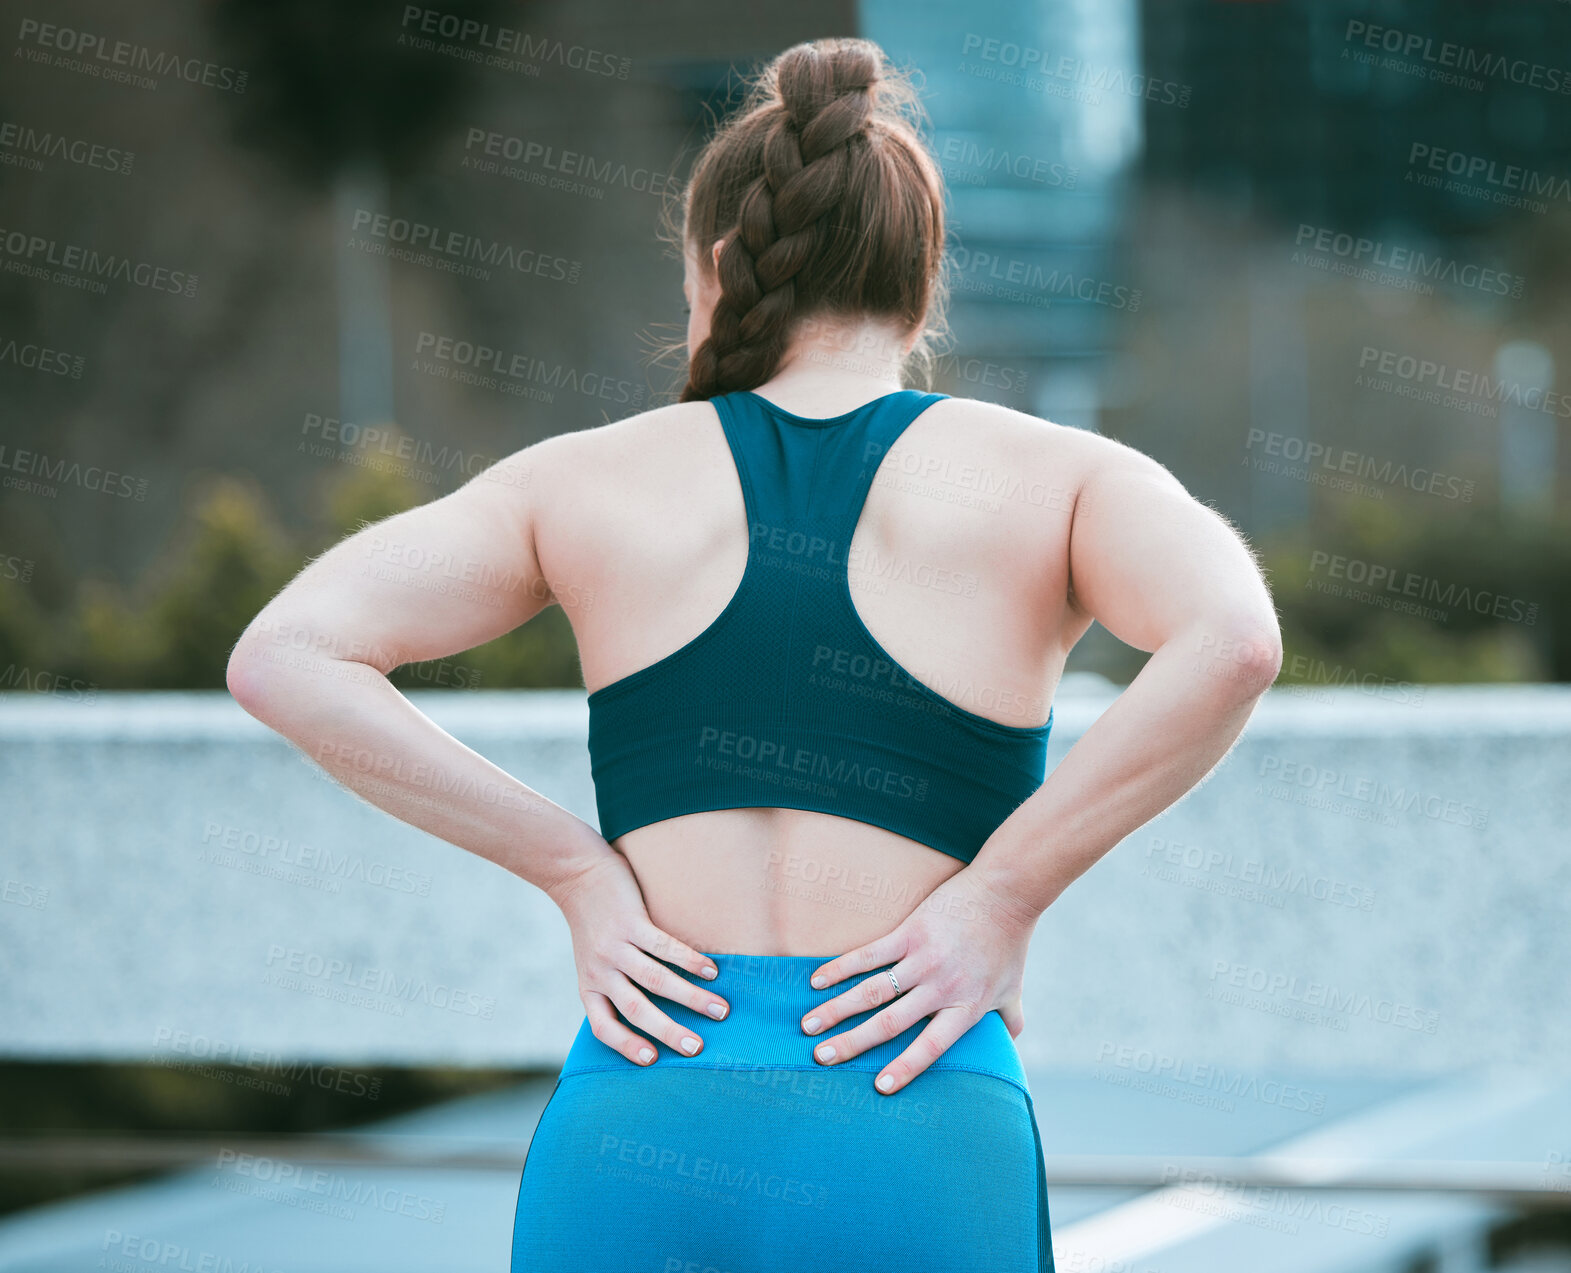 Buy stock photo One caucasian woman from behind holding sore lower back while exercising outdoors. Female athlete suffering with painful spine injury from fractured joint and inflamed muscles during workout. Struggling with stiff body cramps causing discomfort and strain